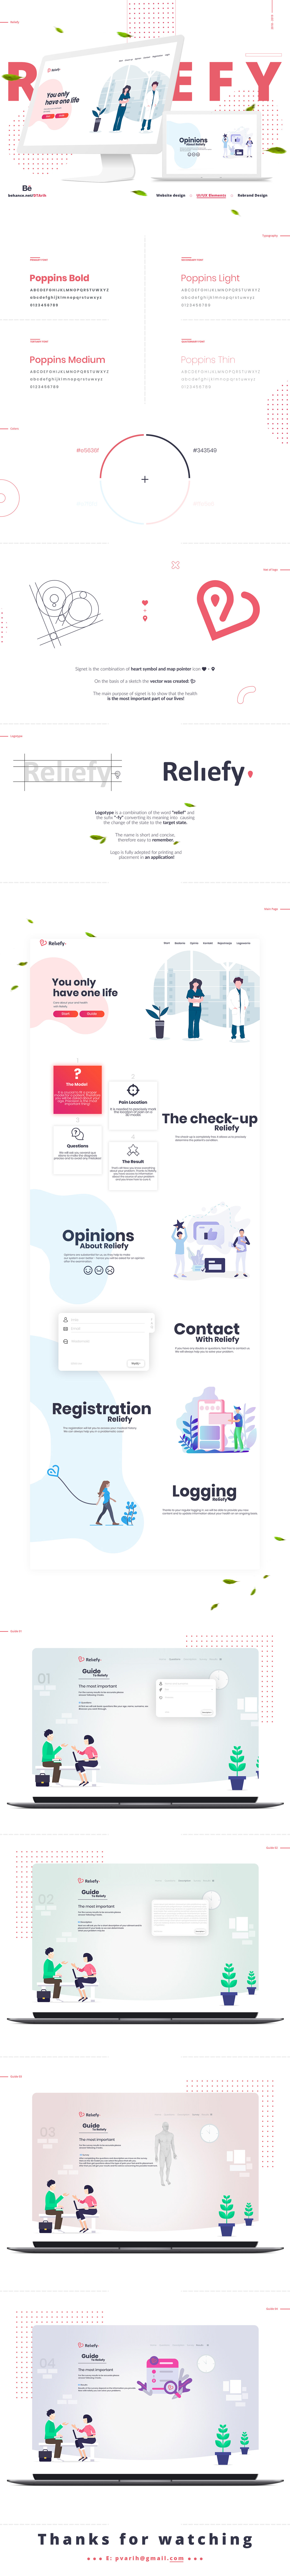 medicine Project photoshop care Health system Behance branding  colorfull dribbble